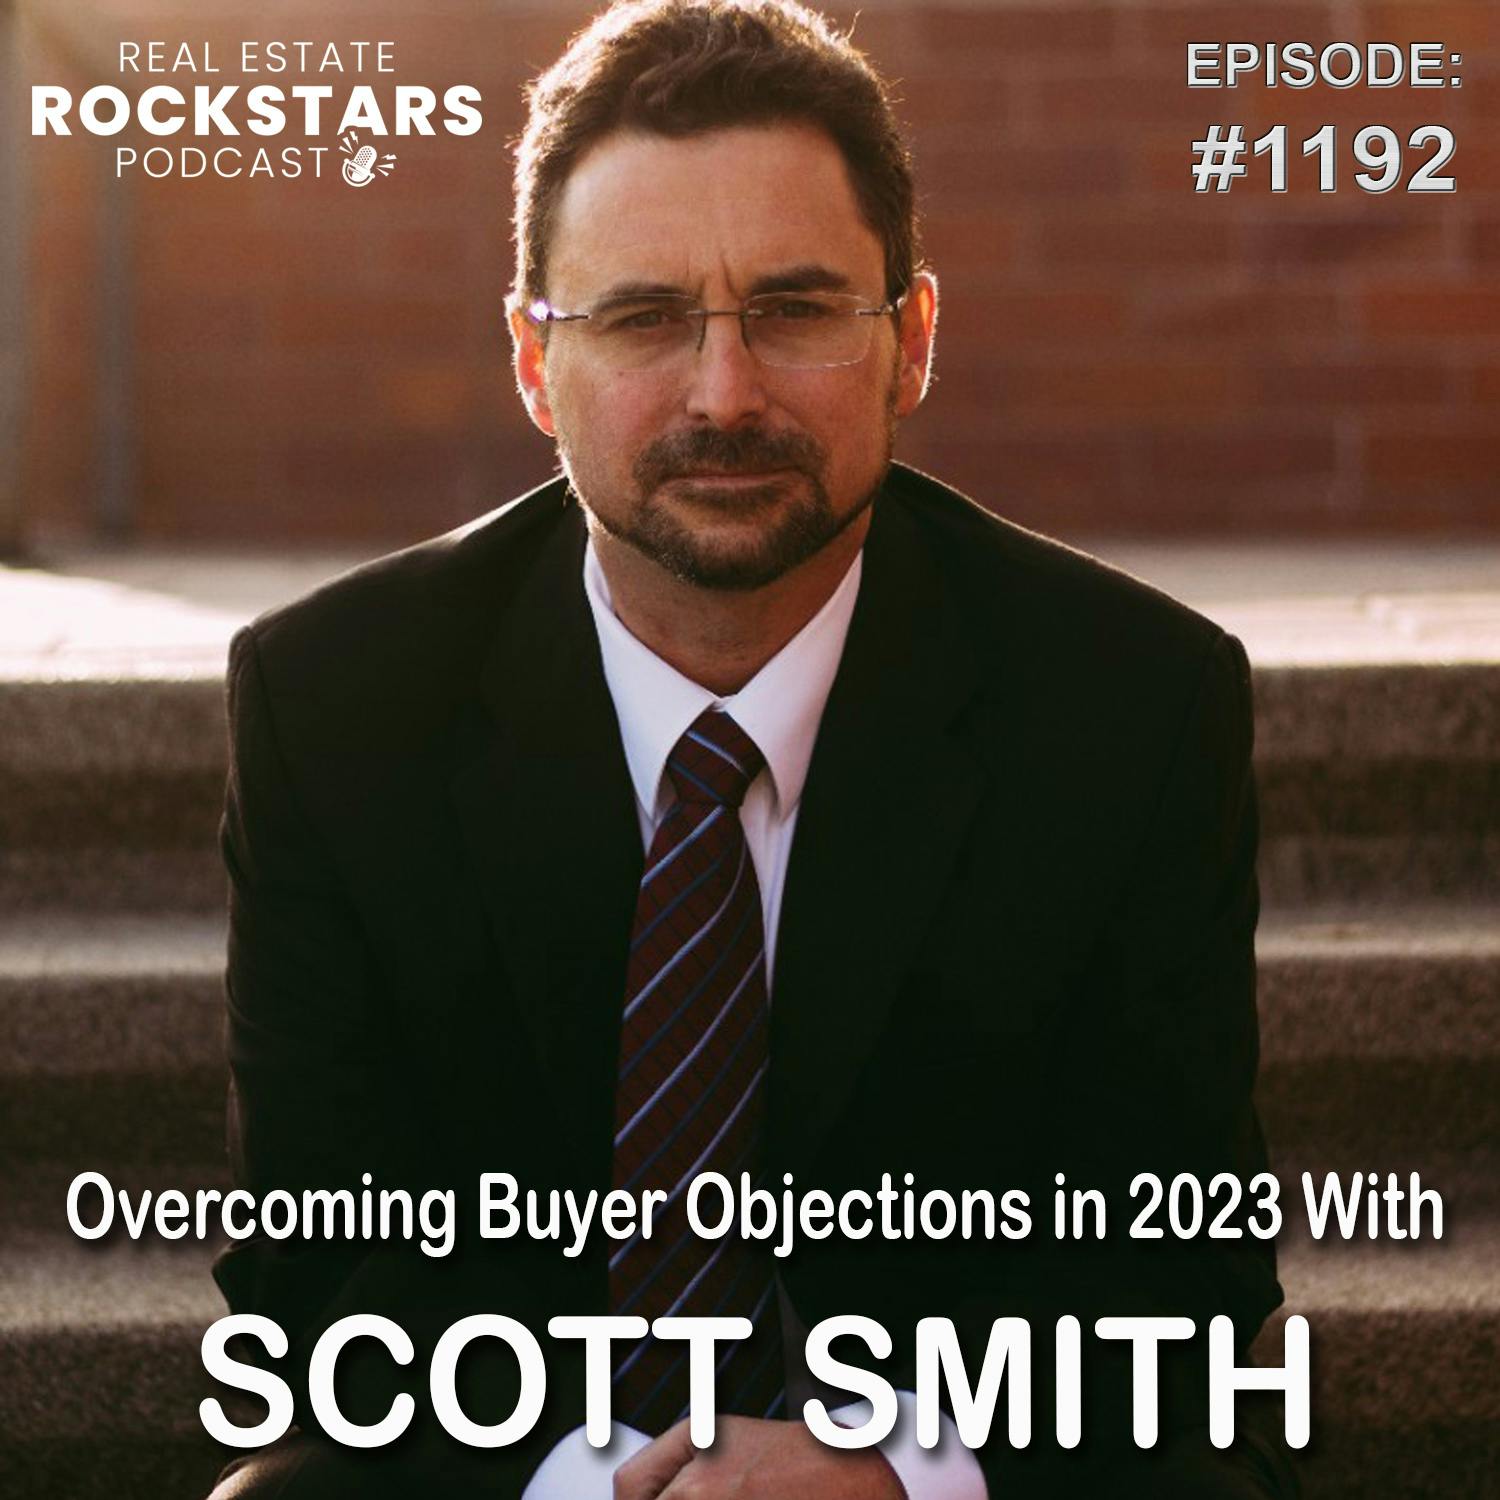 1192: Overcoming Buyer Objections in 2023 With Scott Smith